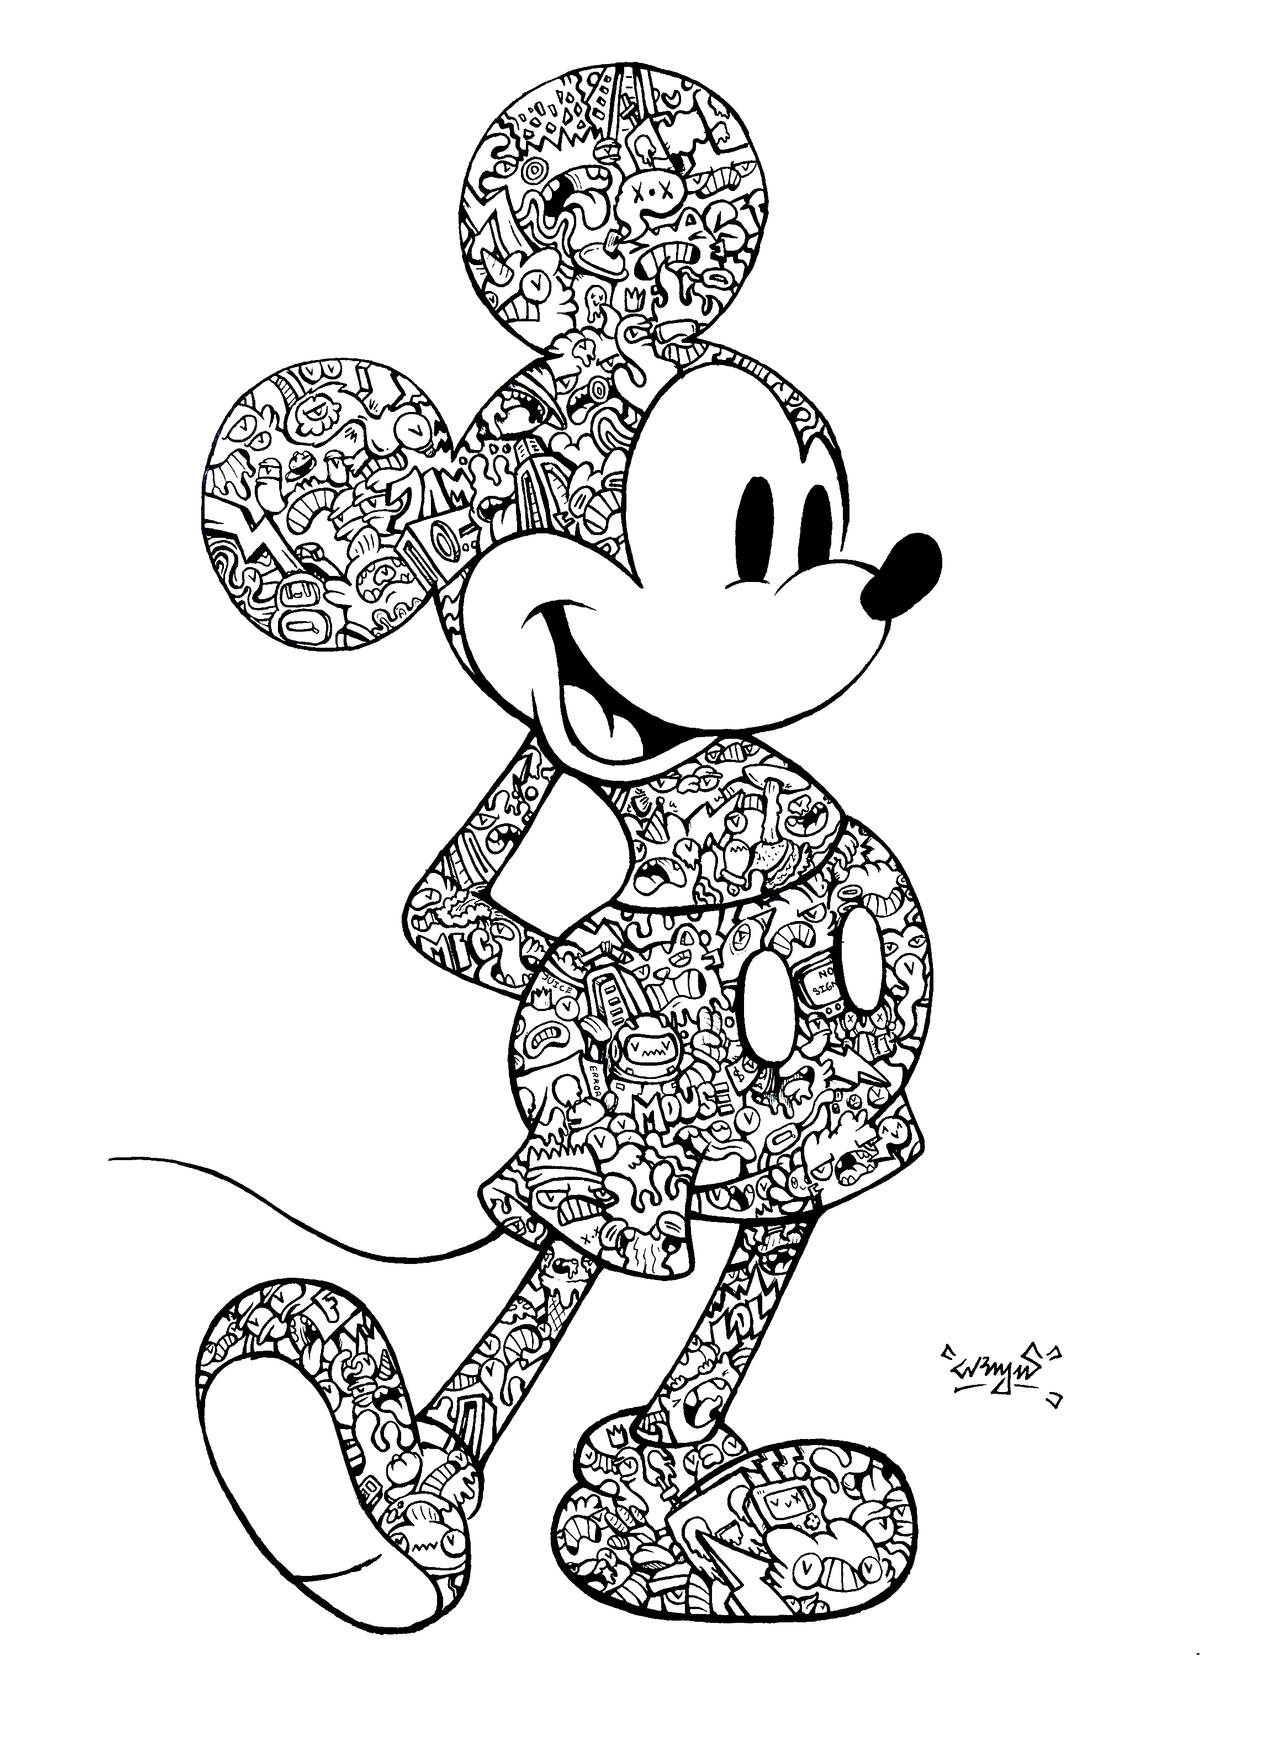 Mickey Mouse Coloring Sheets by BENJIIart on DeviantArt